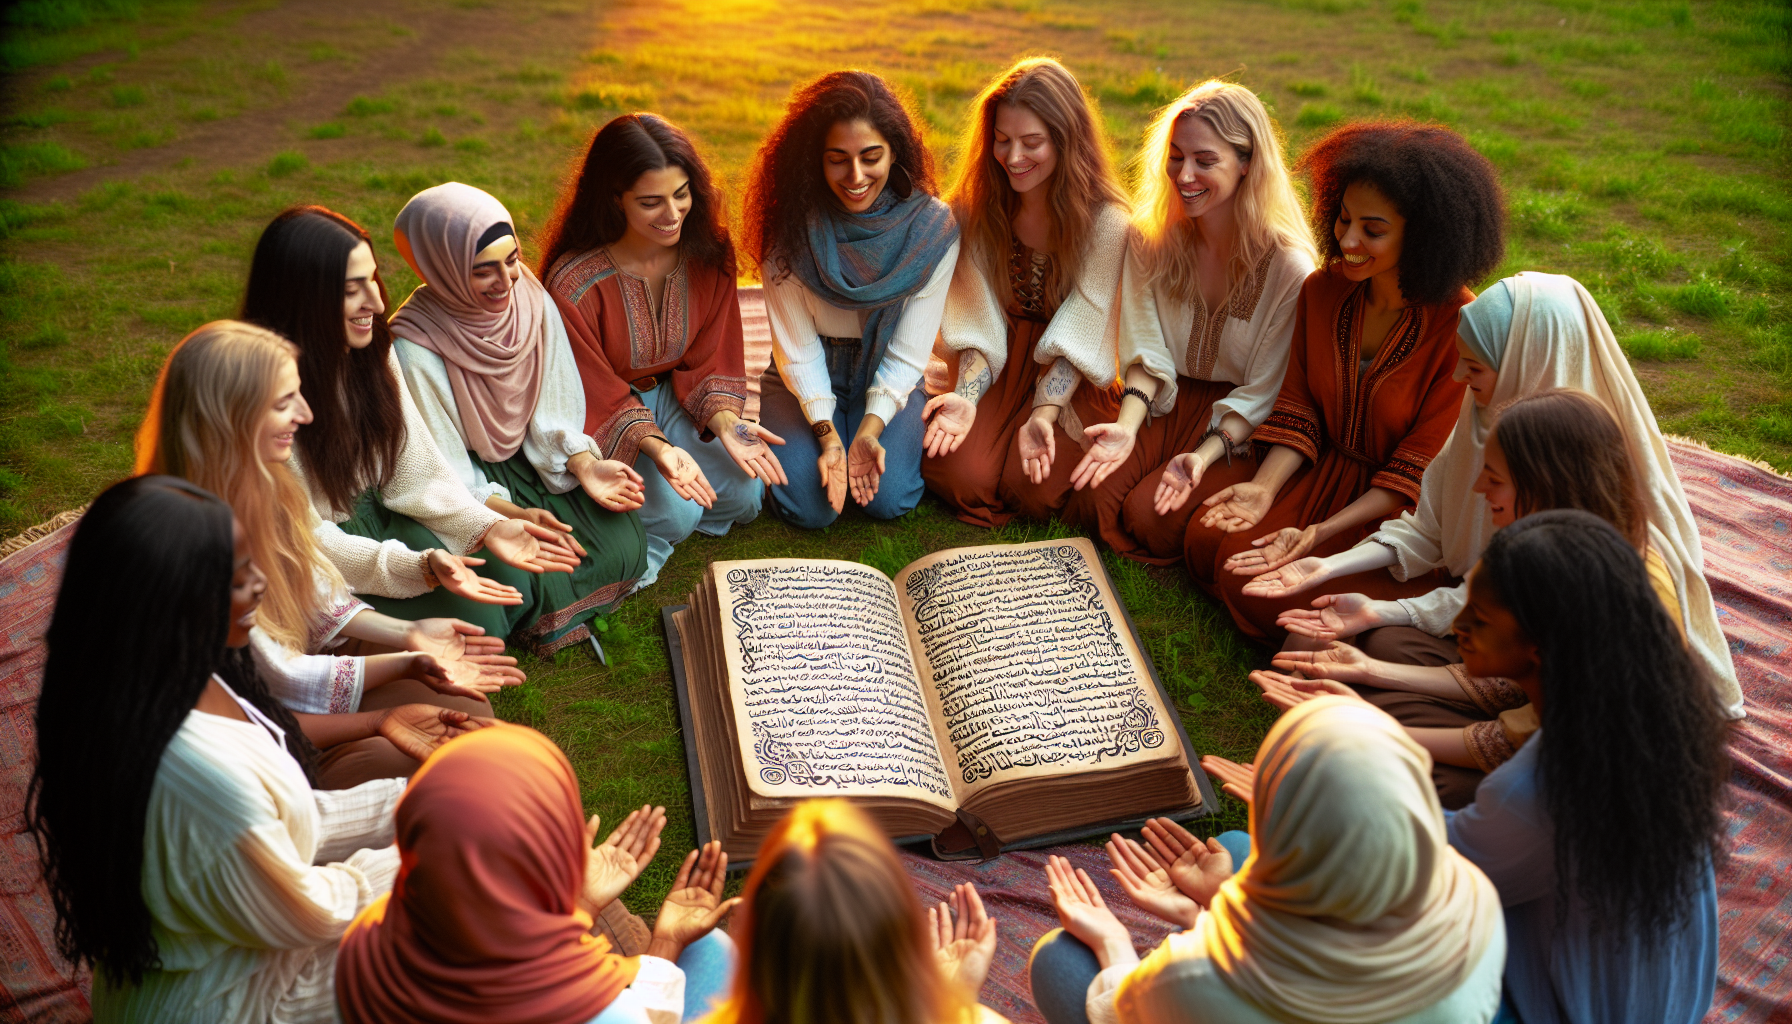 Group of diverse women sitting in a circle, holding hands and studying the Bible together